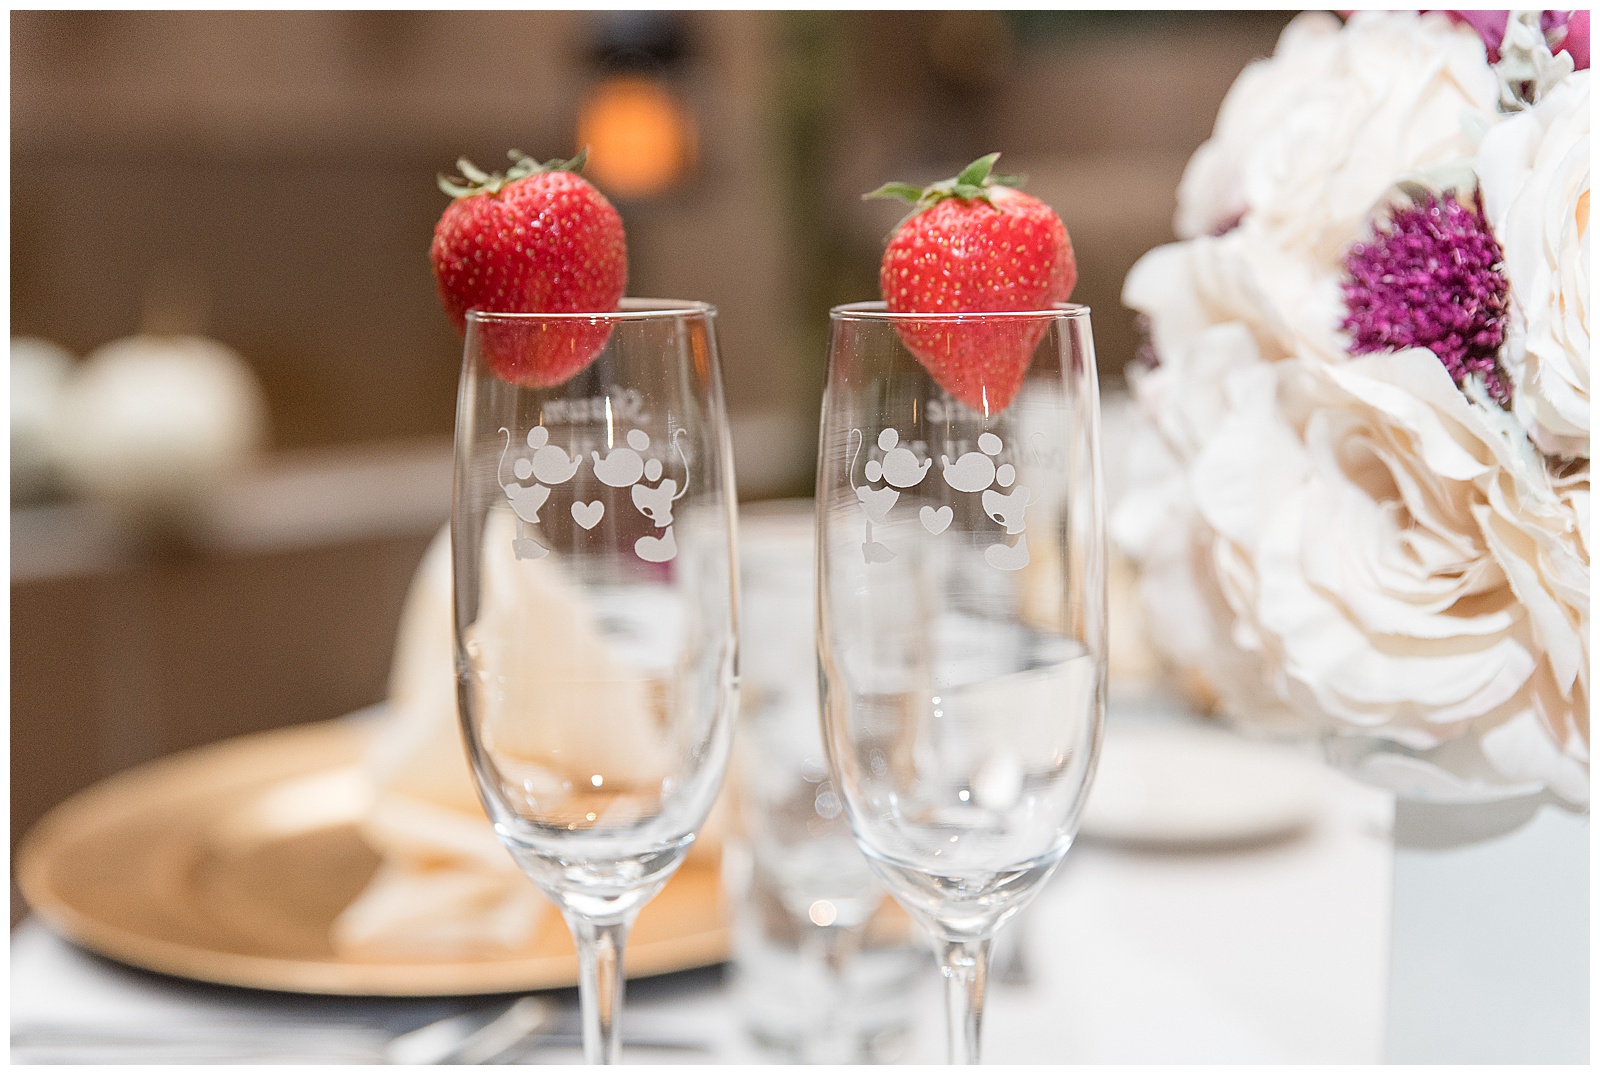 strawberries displayed on champagne glasses during reception